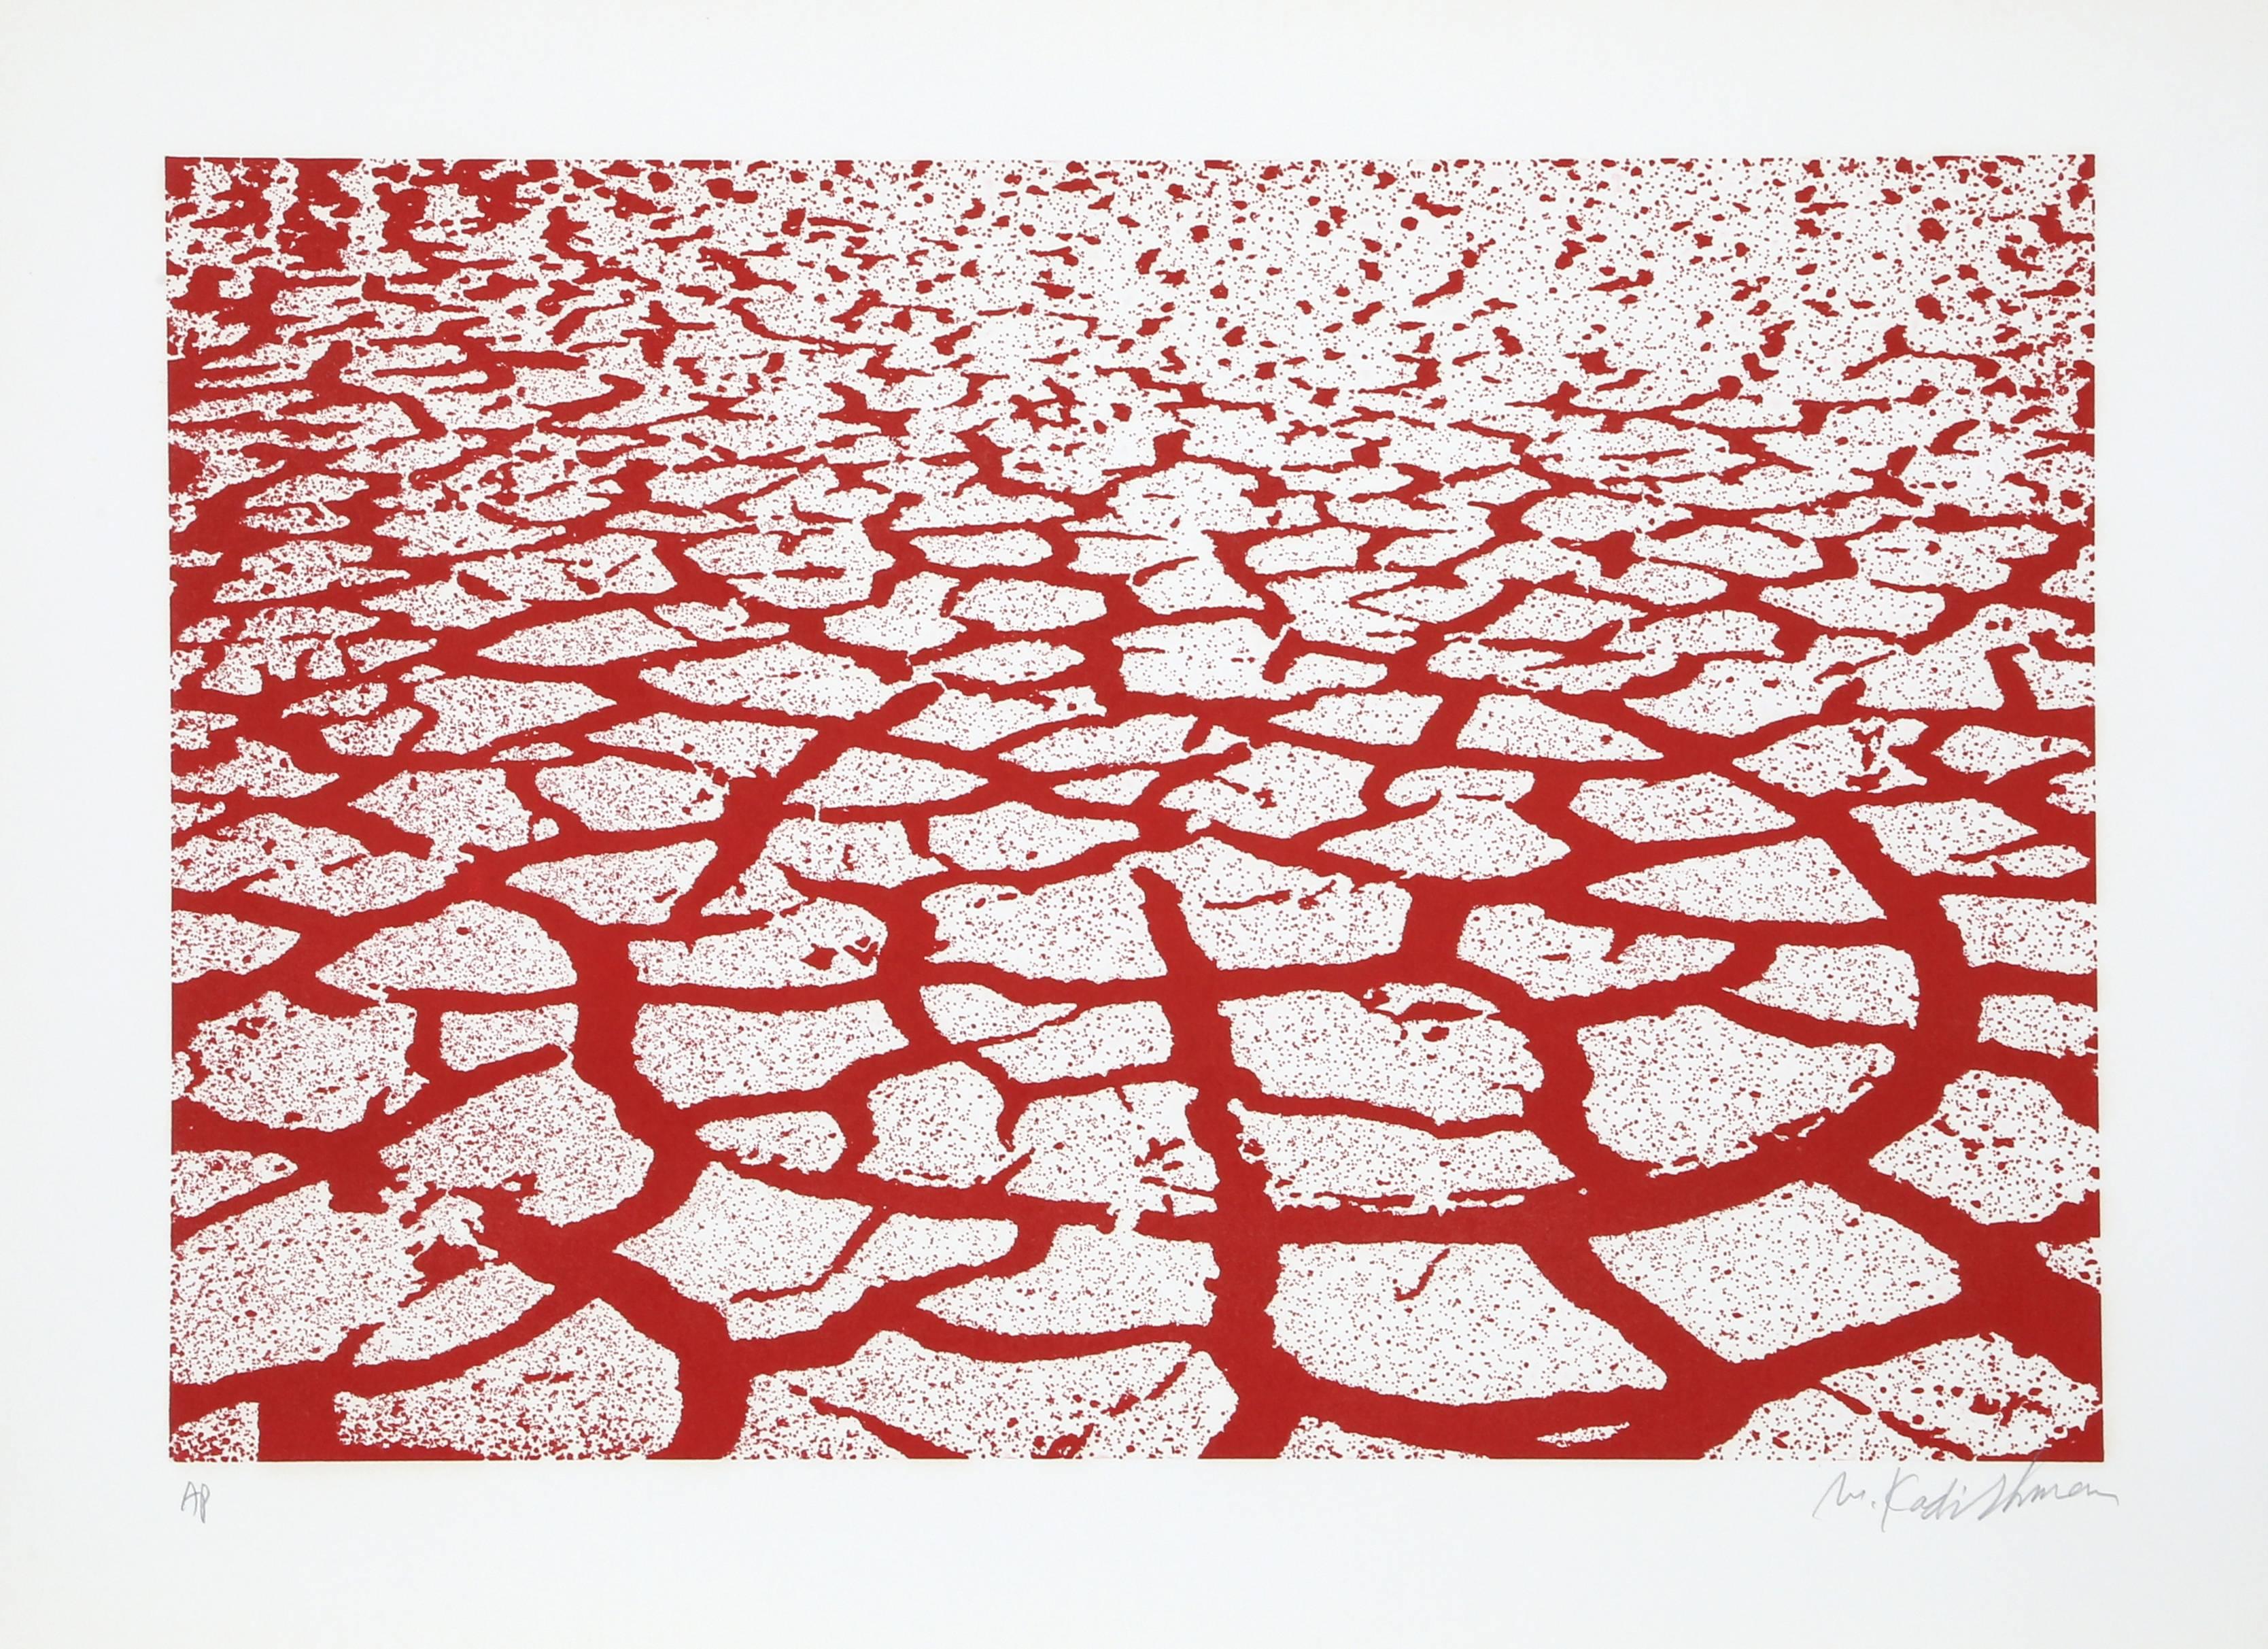 Artist:  Menashe Kadishman, Israeli (1932 - 2015)
Title:  Red Earth
Year:  circa 1979
Medium:  Etching with Aquatint, Signed and numbered in pencil
Edition:  50, AP
Image Size: 20 x 29.5 inches 
Size:  31 x 39 in. (78.74 x 99.06 cm)